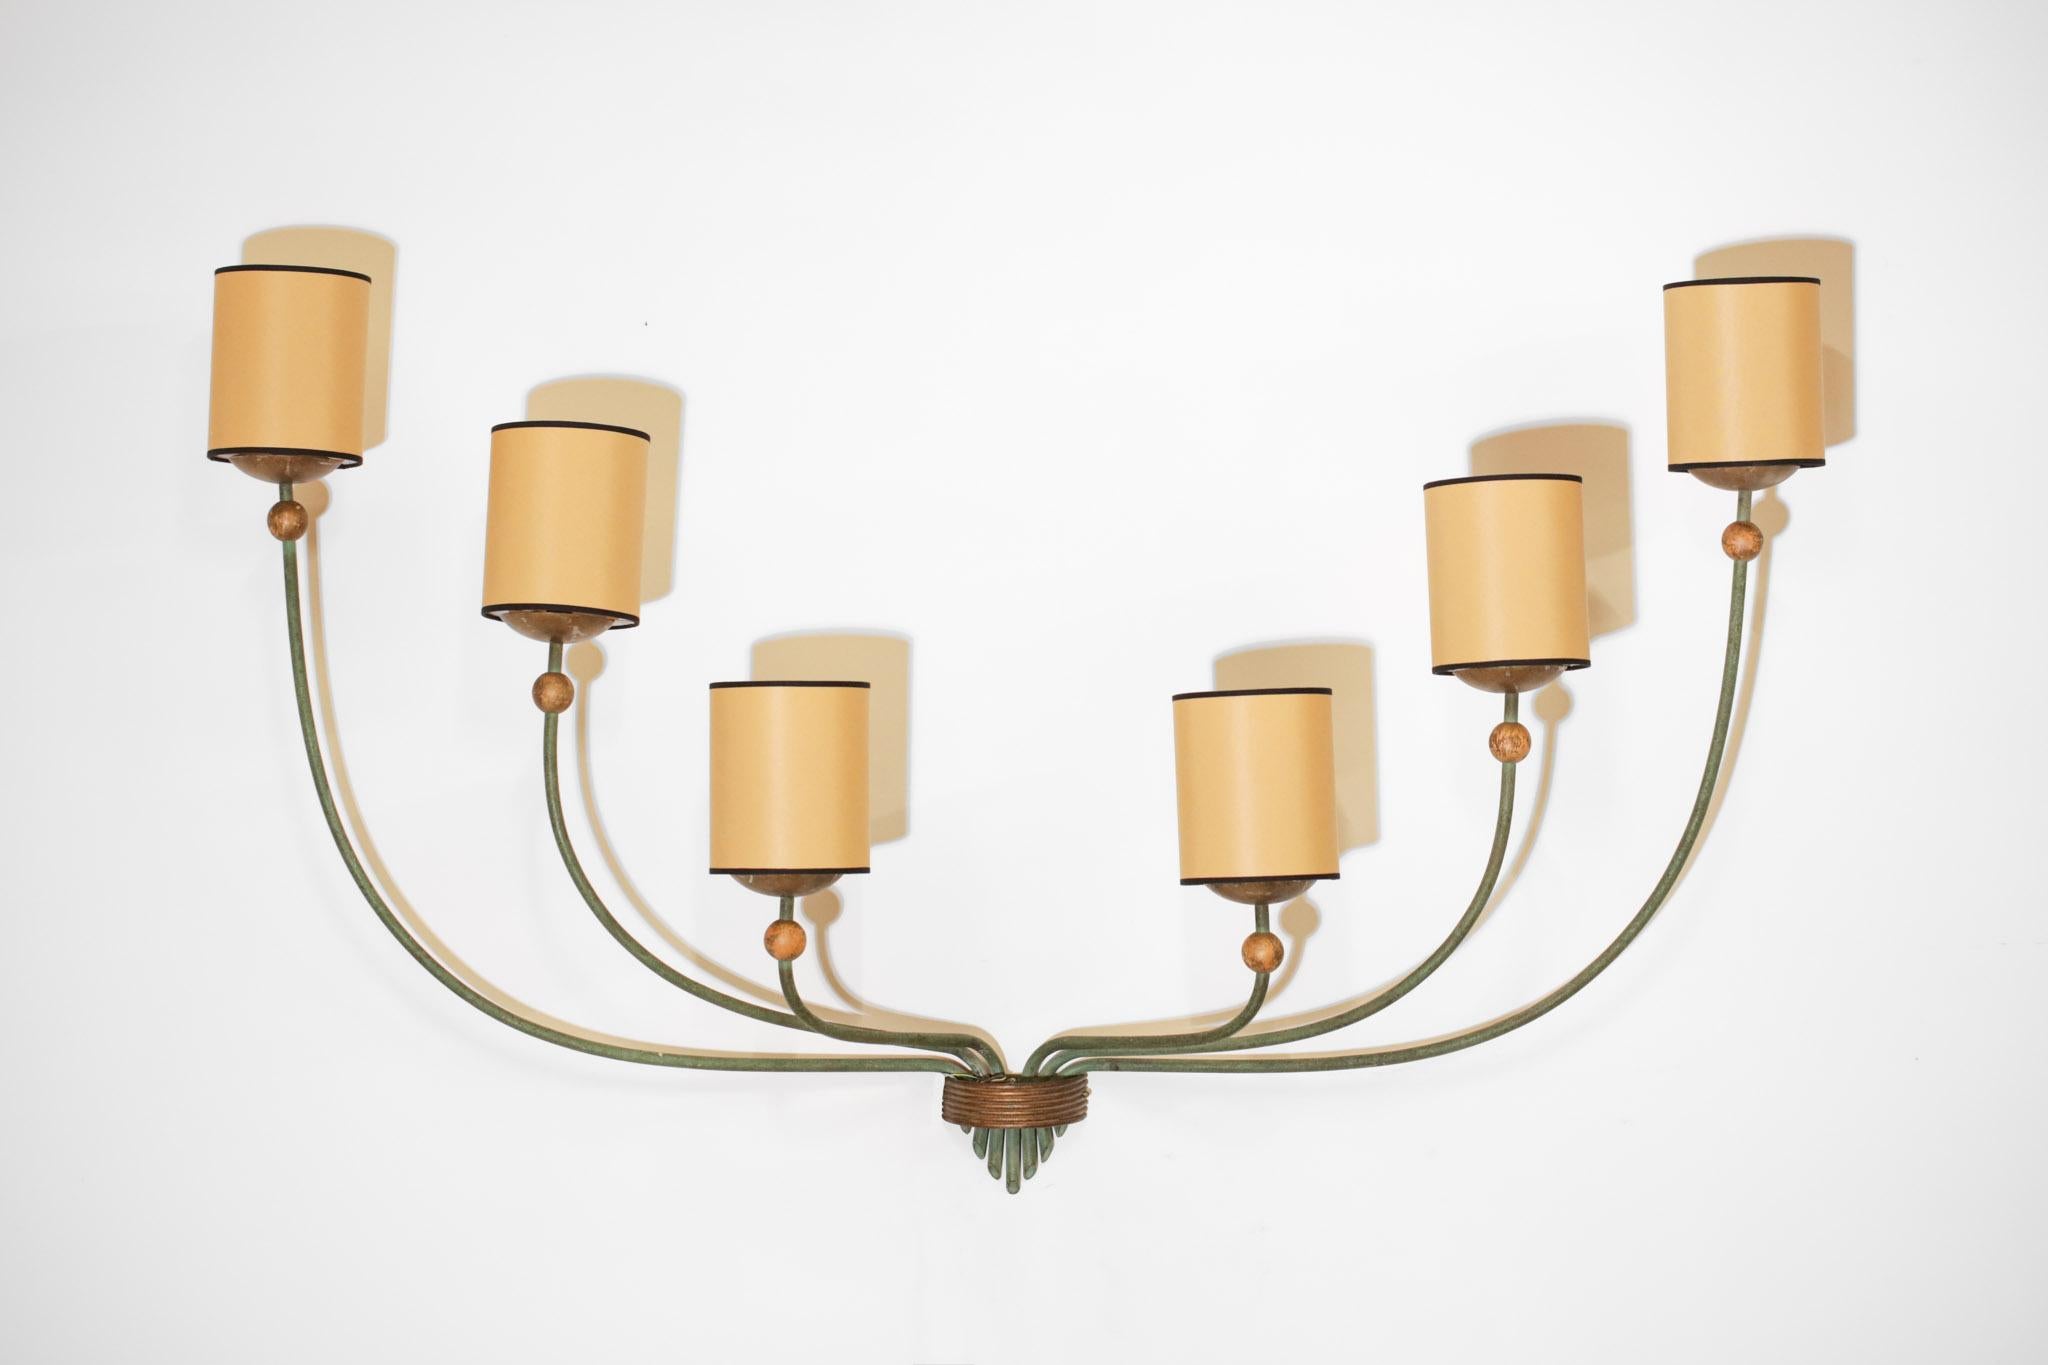 French Rare Large Pair of Art Deco Sconces from the 30's Jean Royère Style, A39